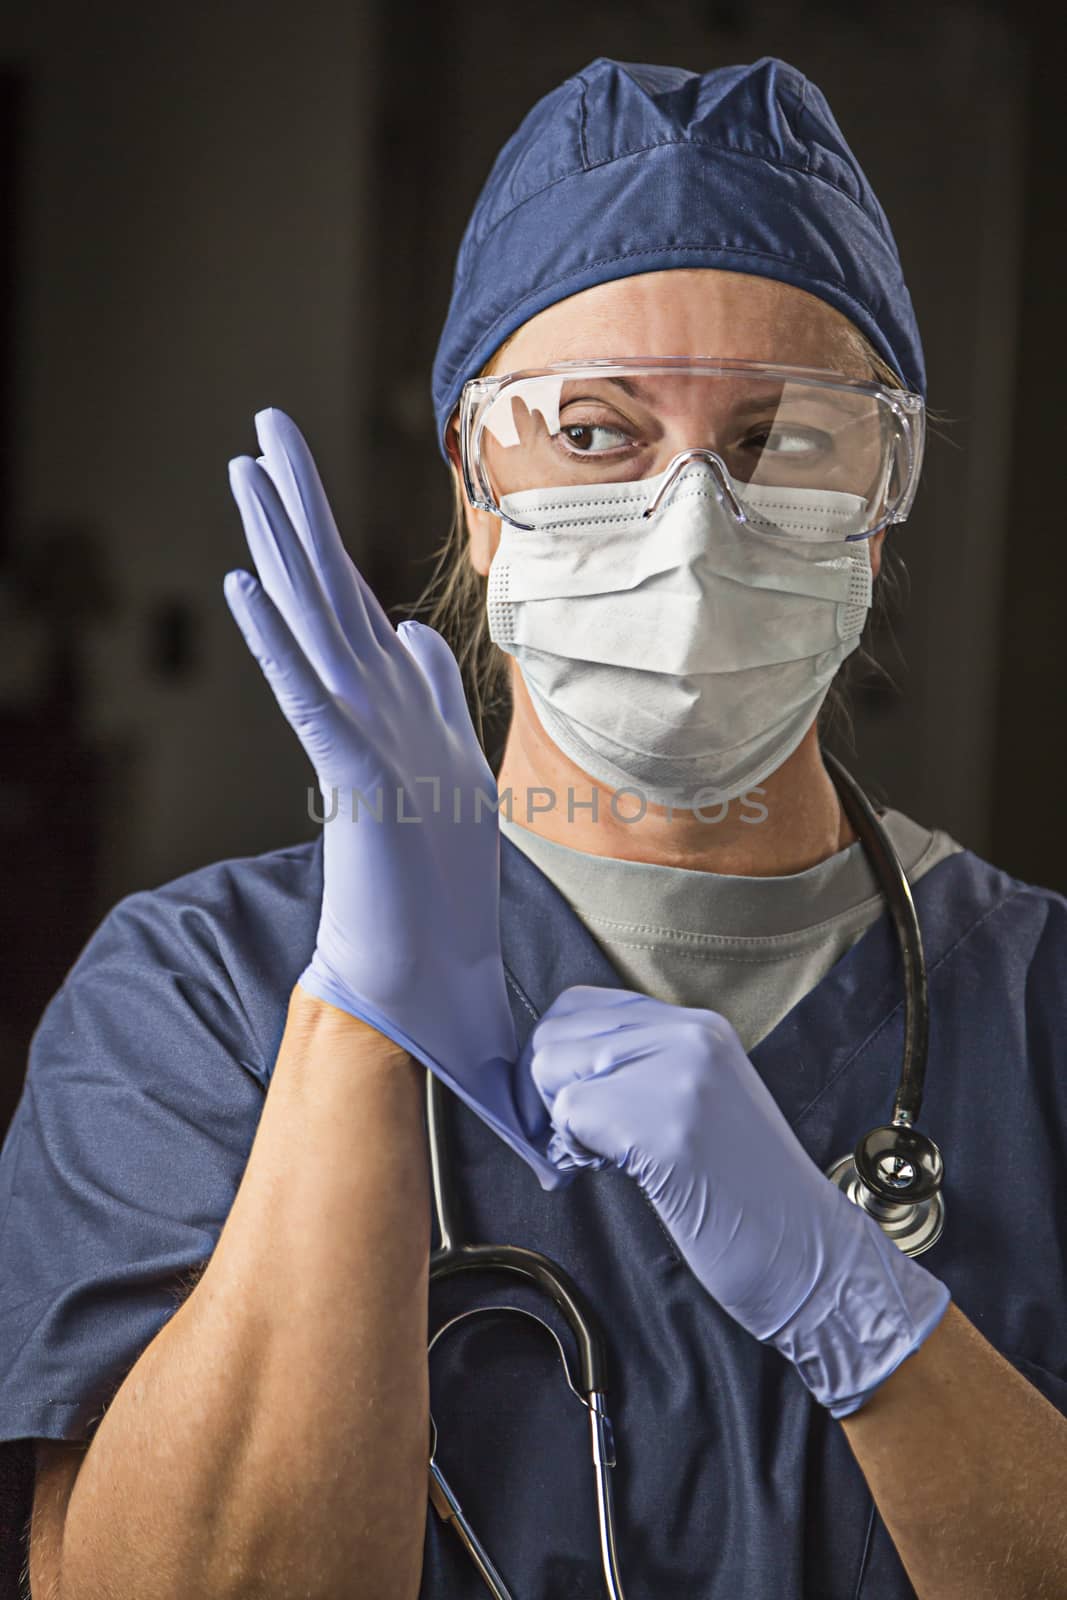 Concerned Female Doctor or Nurse Putting on Protective Facial Wear and Surgical Gloves.